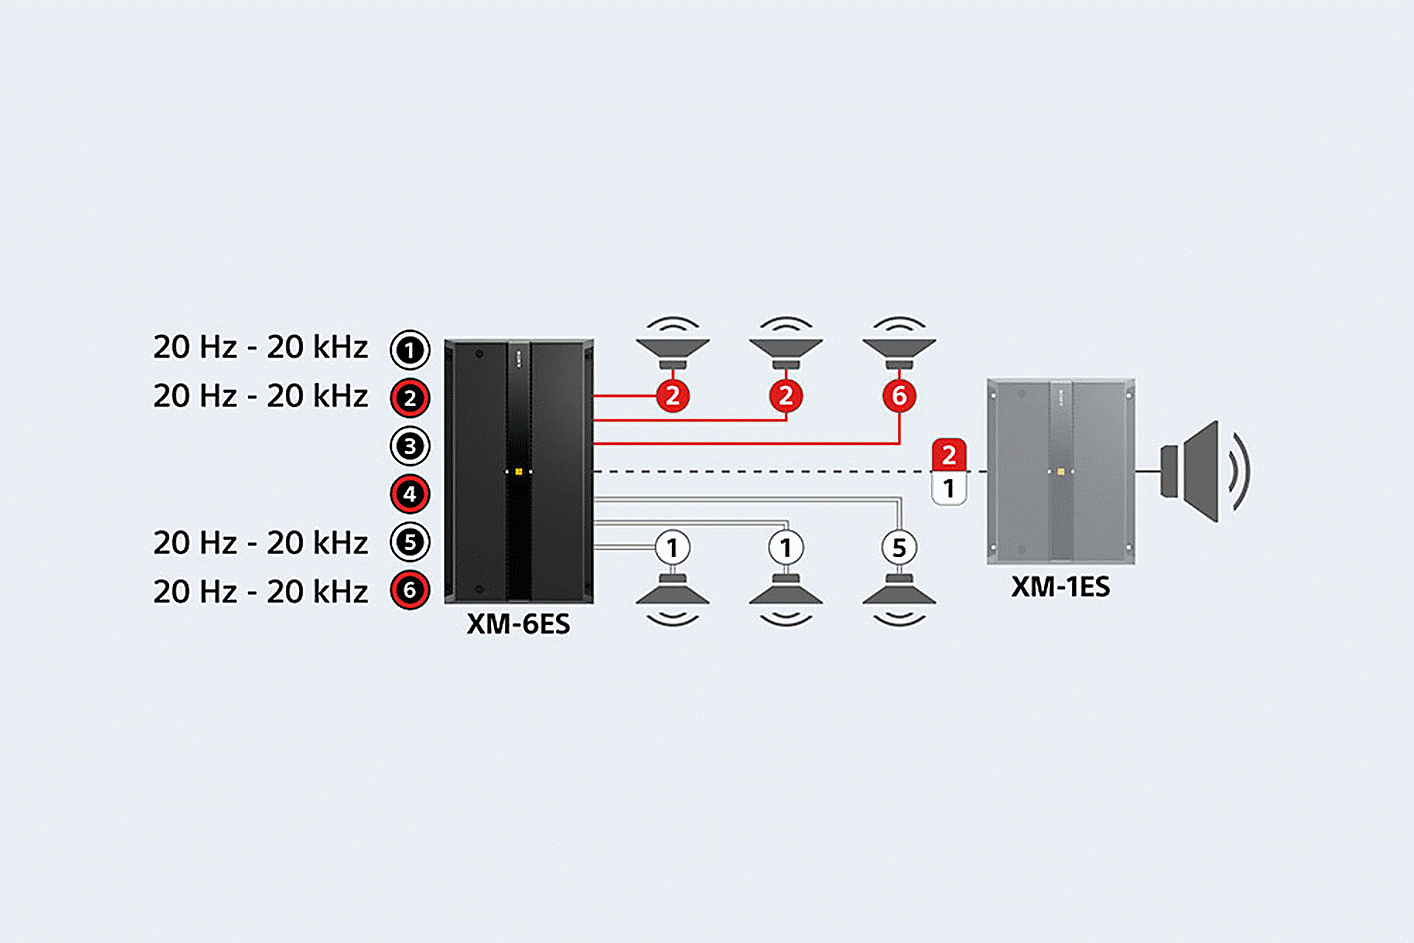 Diagram of the XM-6ES connected to six speakers and a XM-1ES, sound settings are displayed next to ports 1, 2, 5 and 6